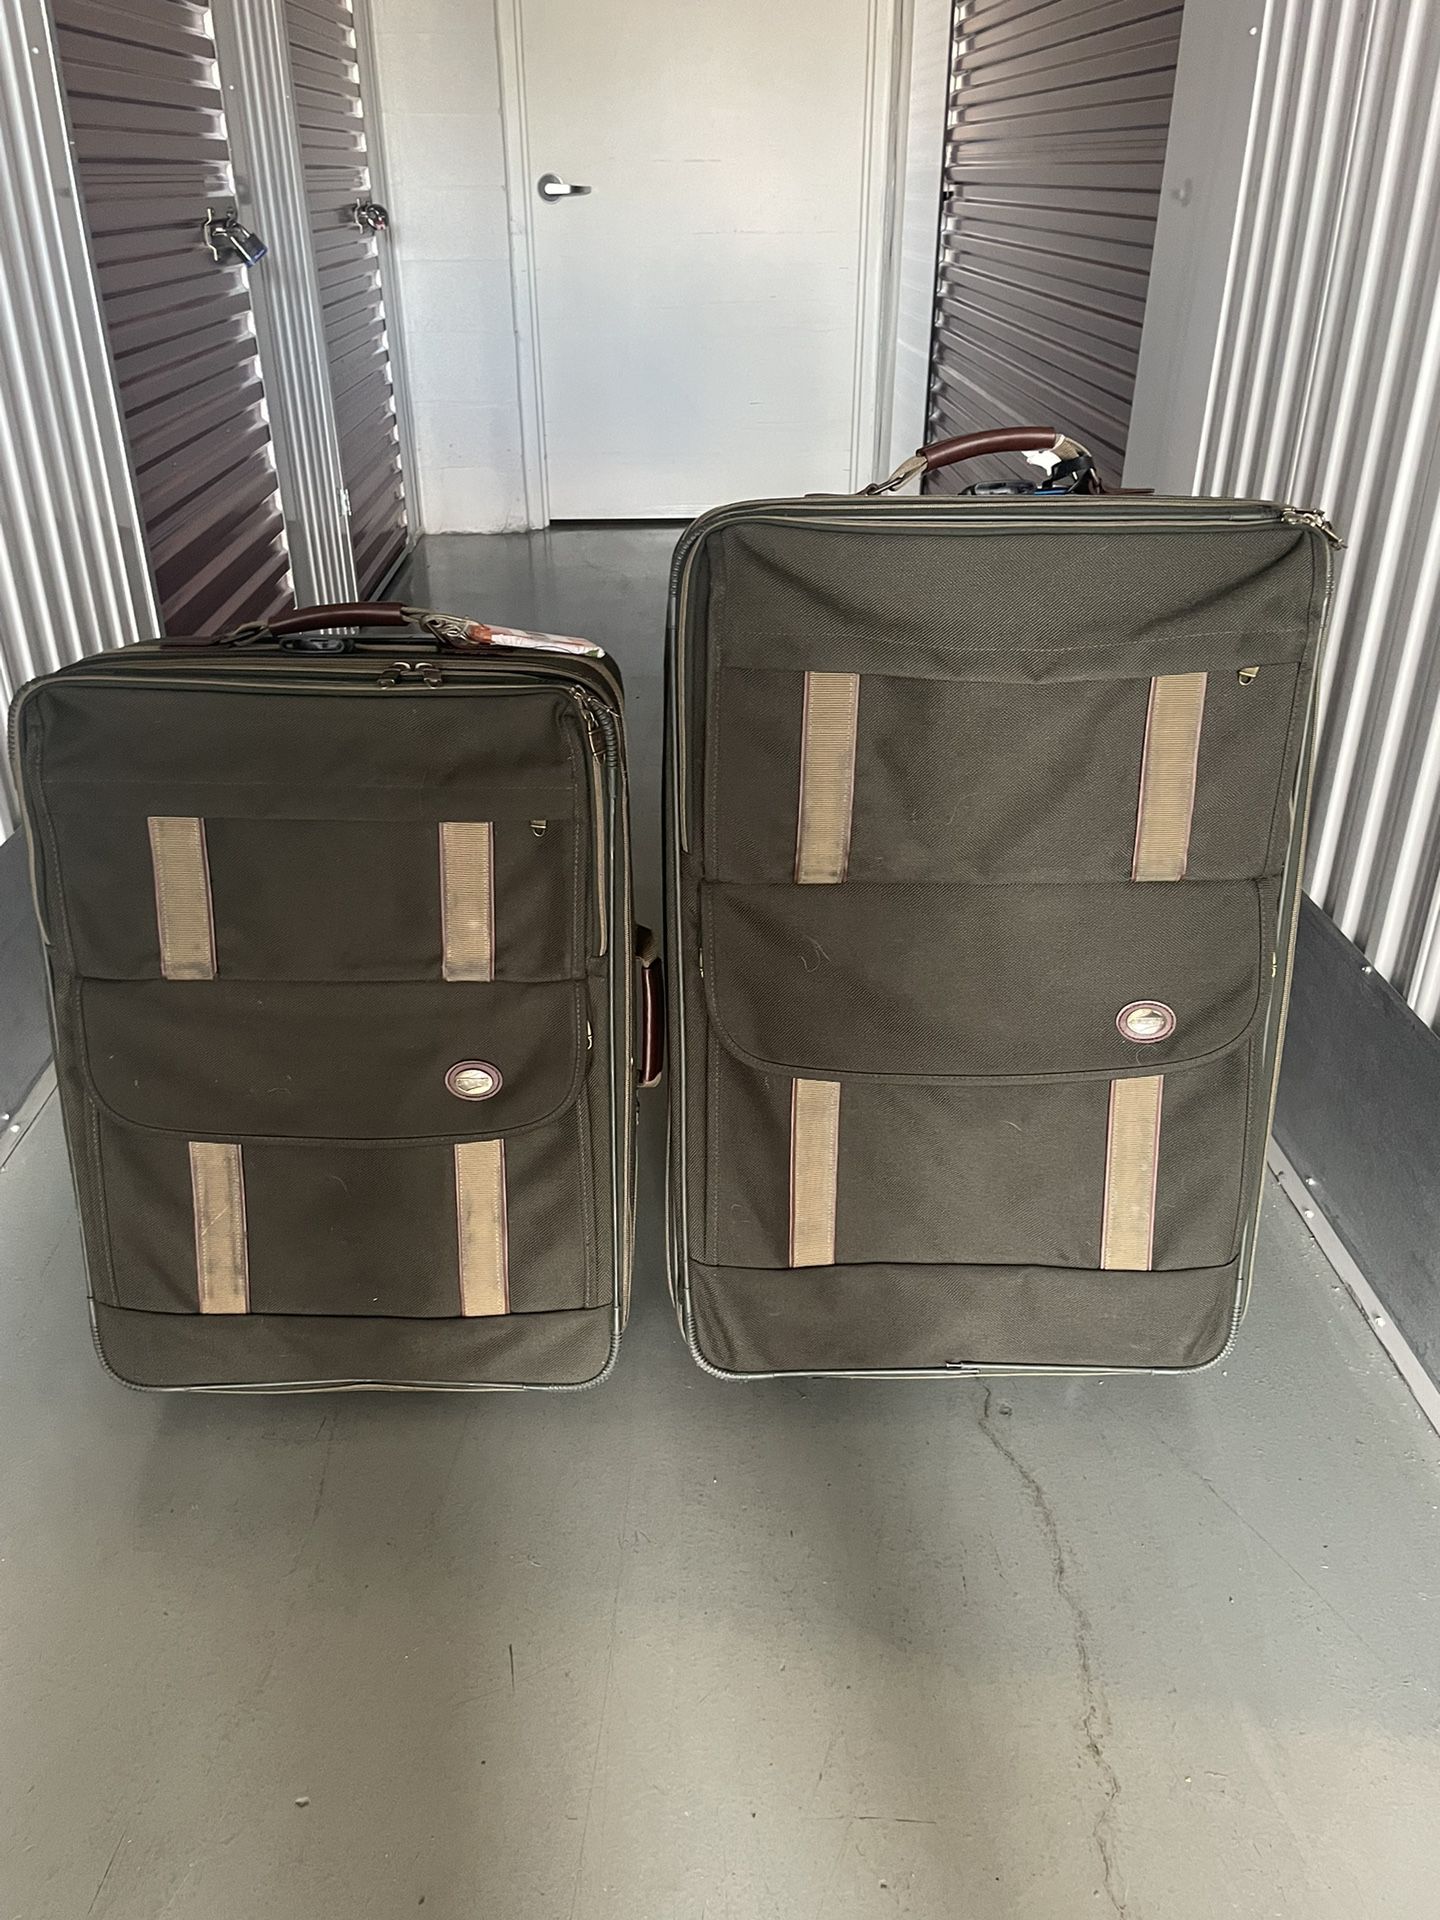 Two Green Suitcases With Wheels